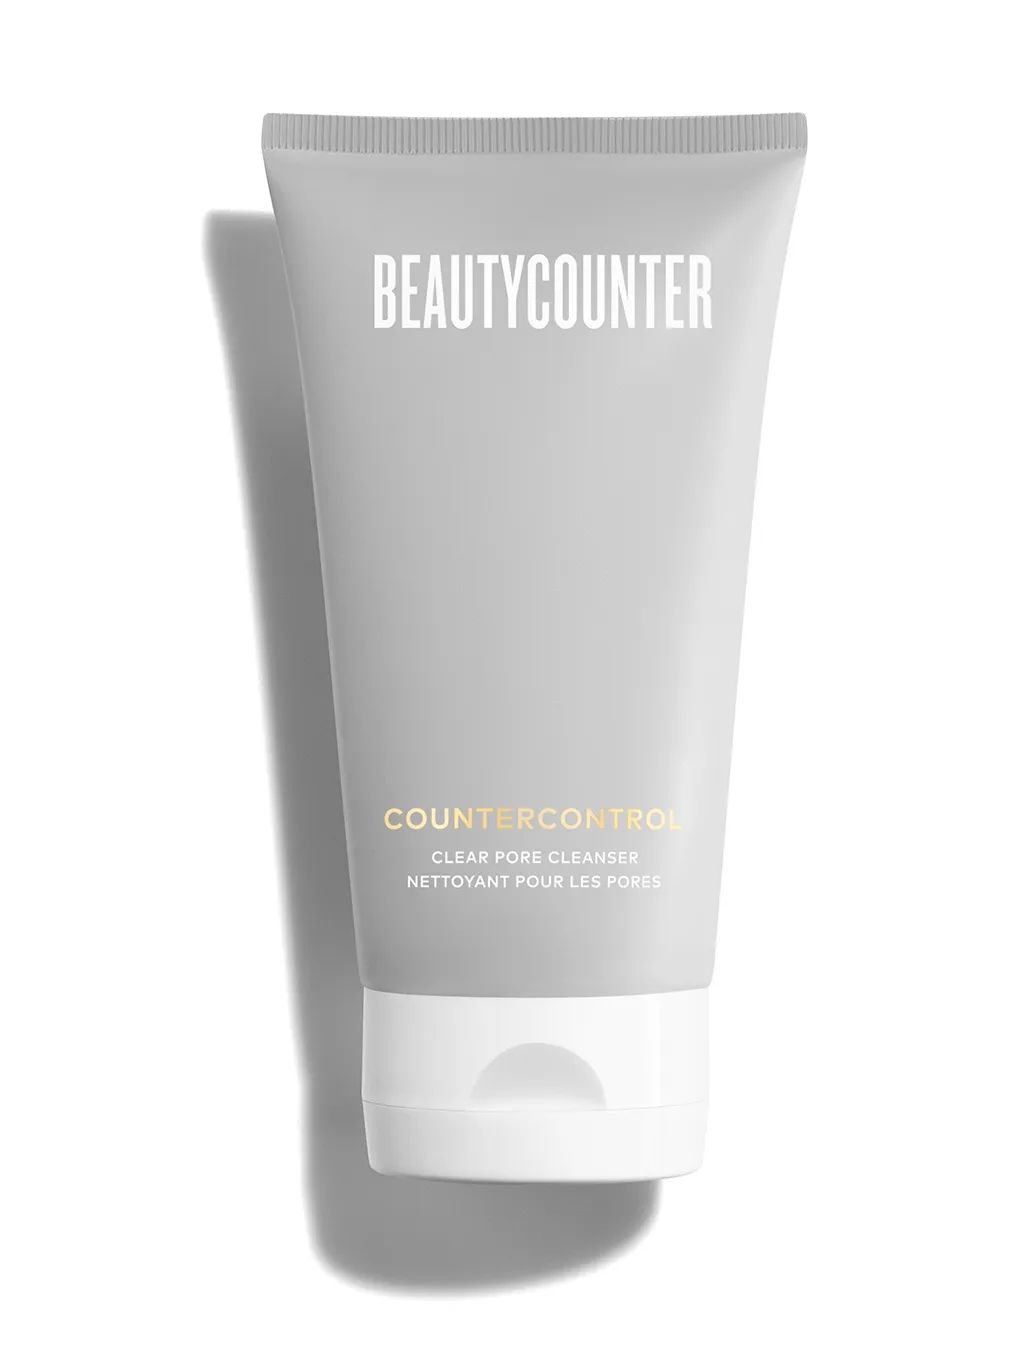 Countercontrol Clear Pore Cleanser - Beautycounter - Skin Care, Makeup, Bath and Body and more! | Beautycounter.com